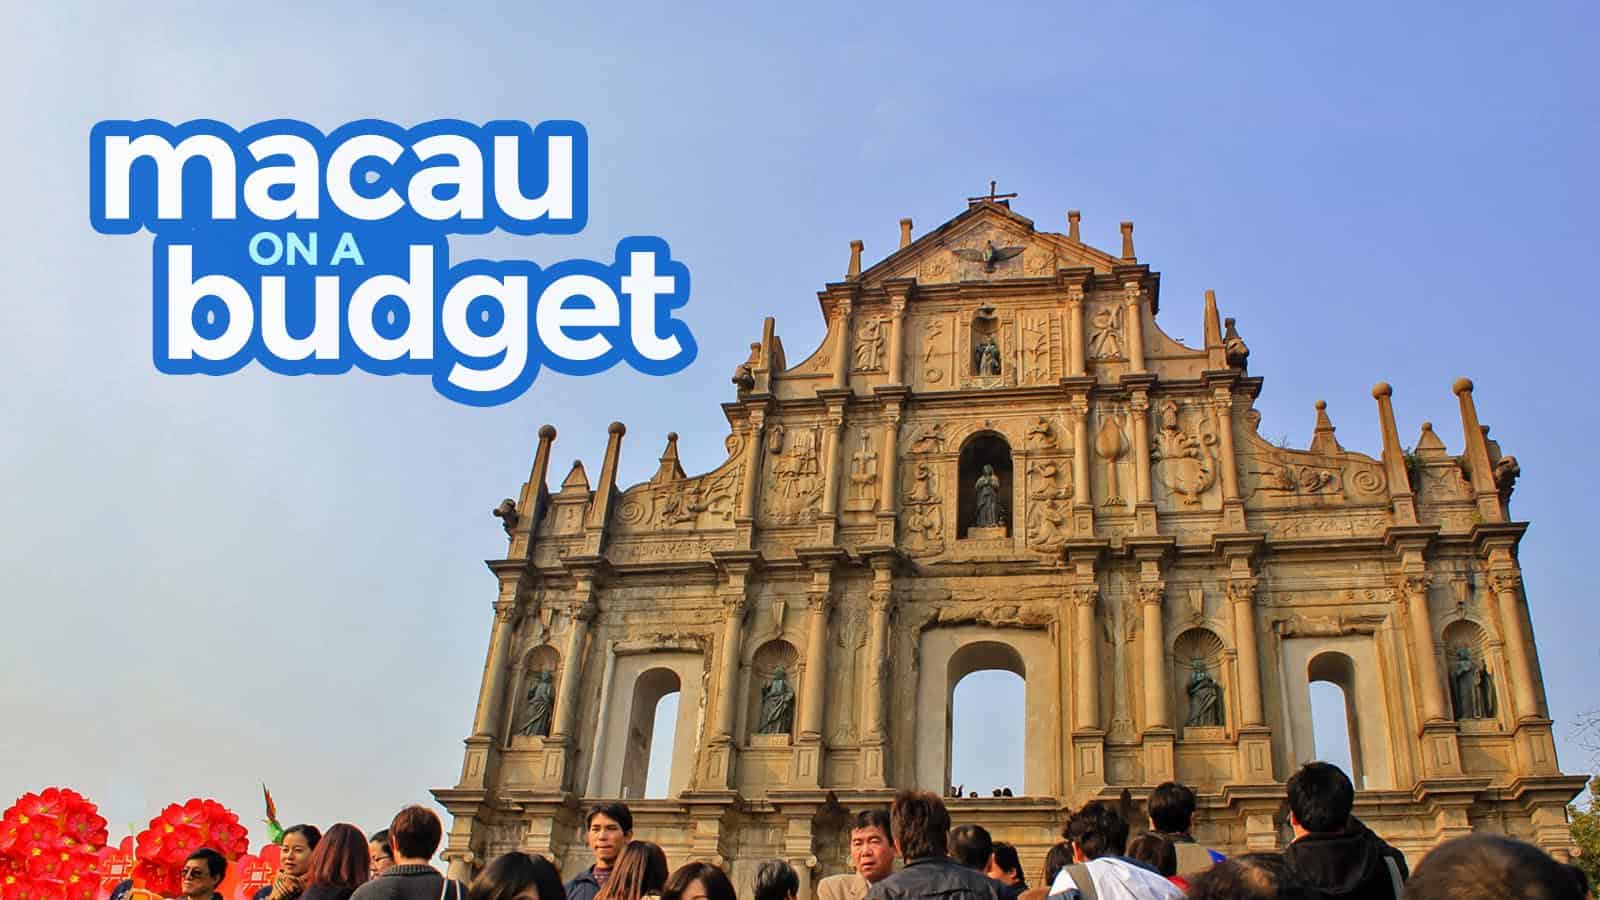 MACAU TRAVEL GUIDE with Budget Itinerary